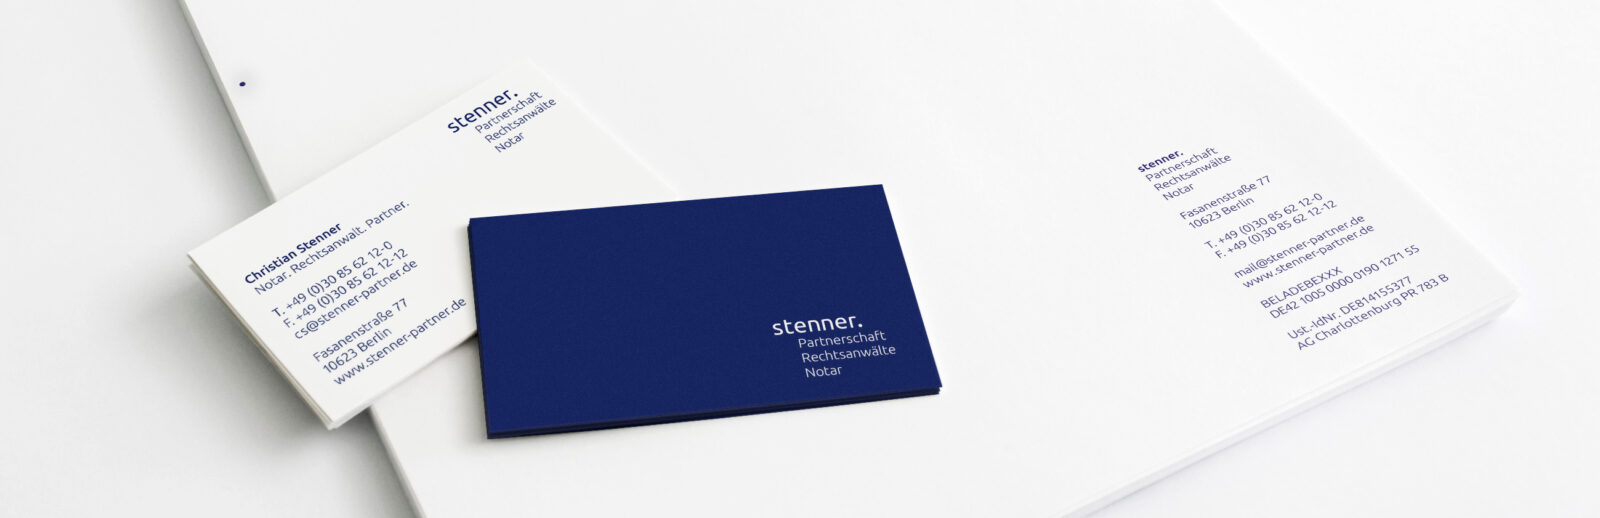 IONDESIGN Stenner Foto business stationery